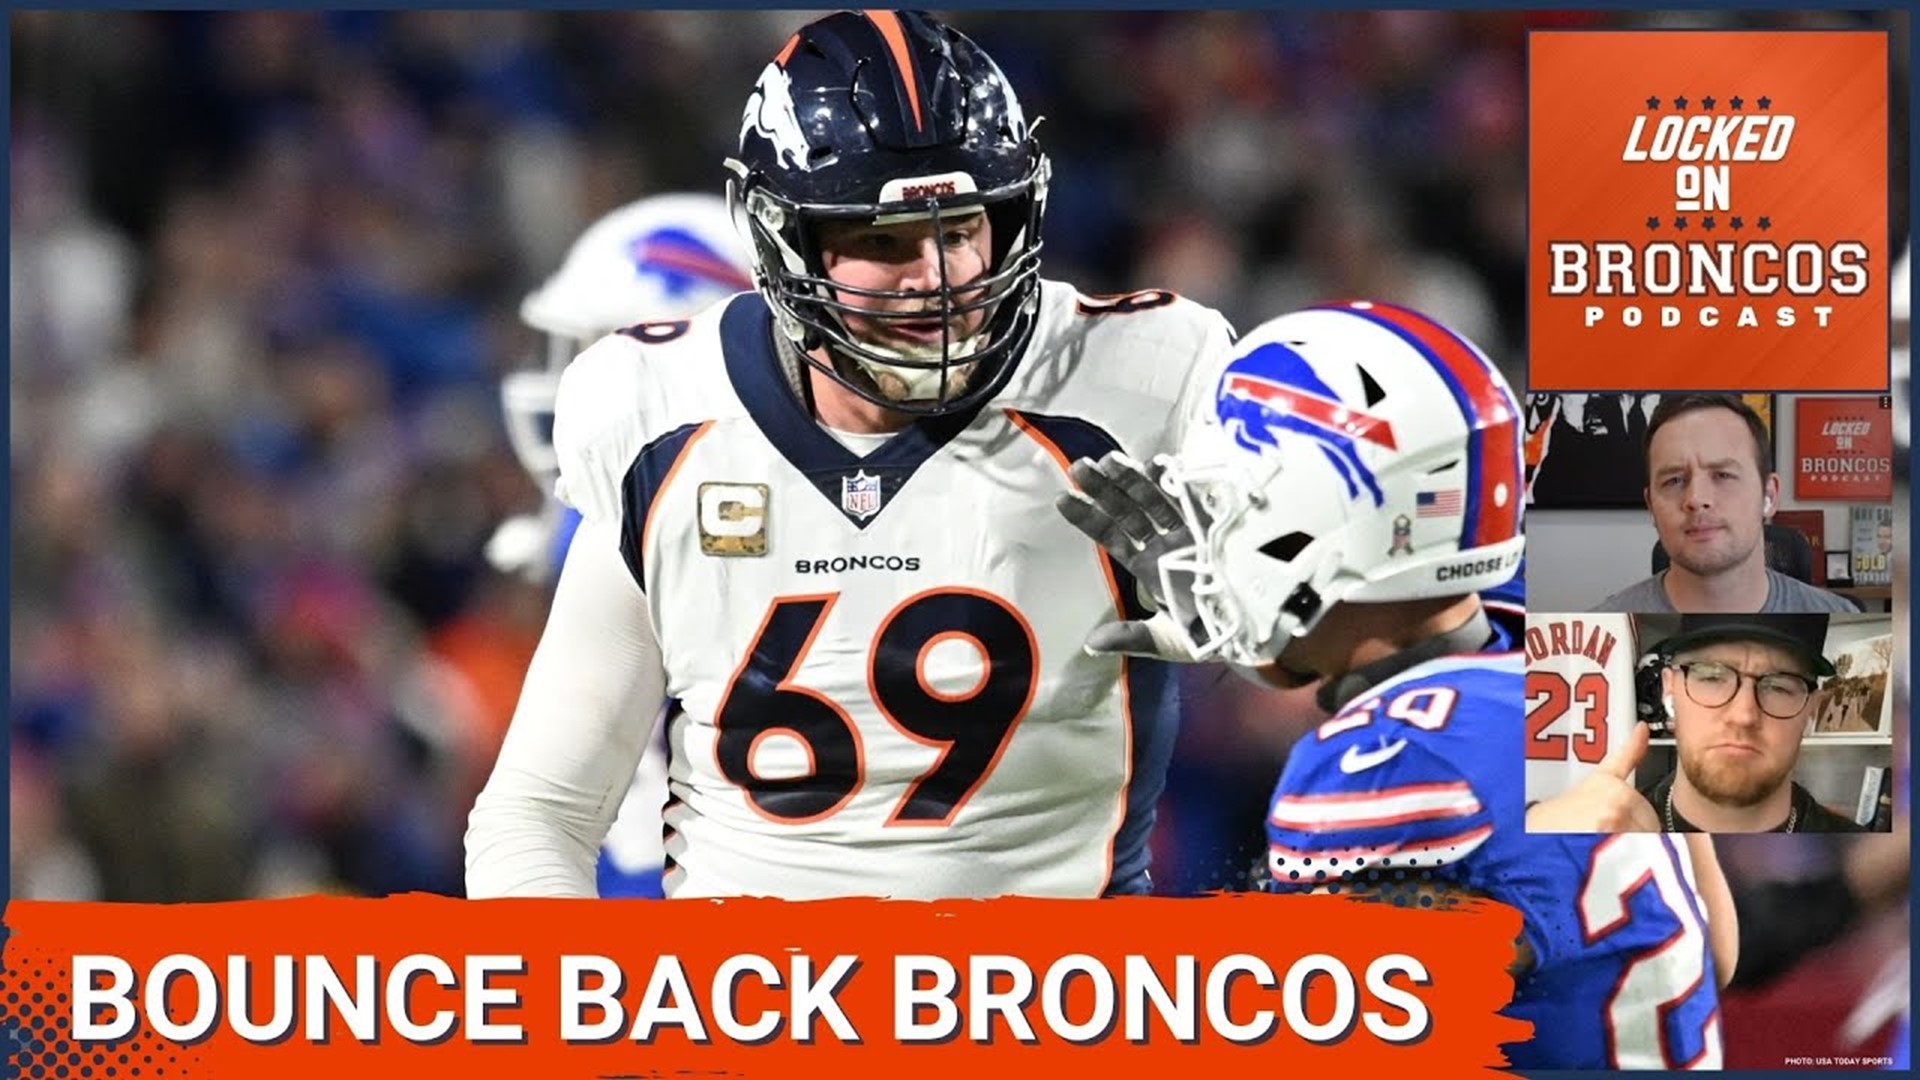 Can Mike McGlinchey, Tim Patrick, and Javonte Williams have bounce back seasons for the Denver Broncos this season?